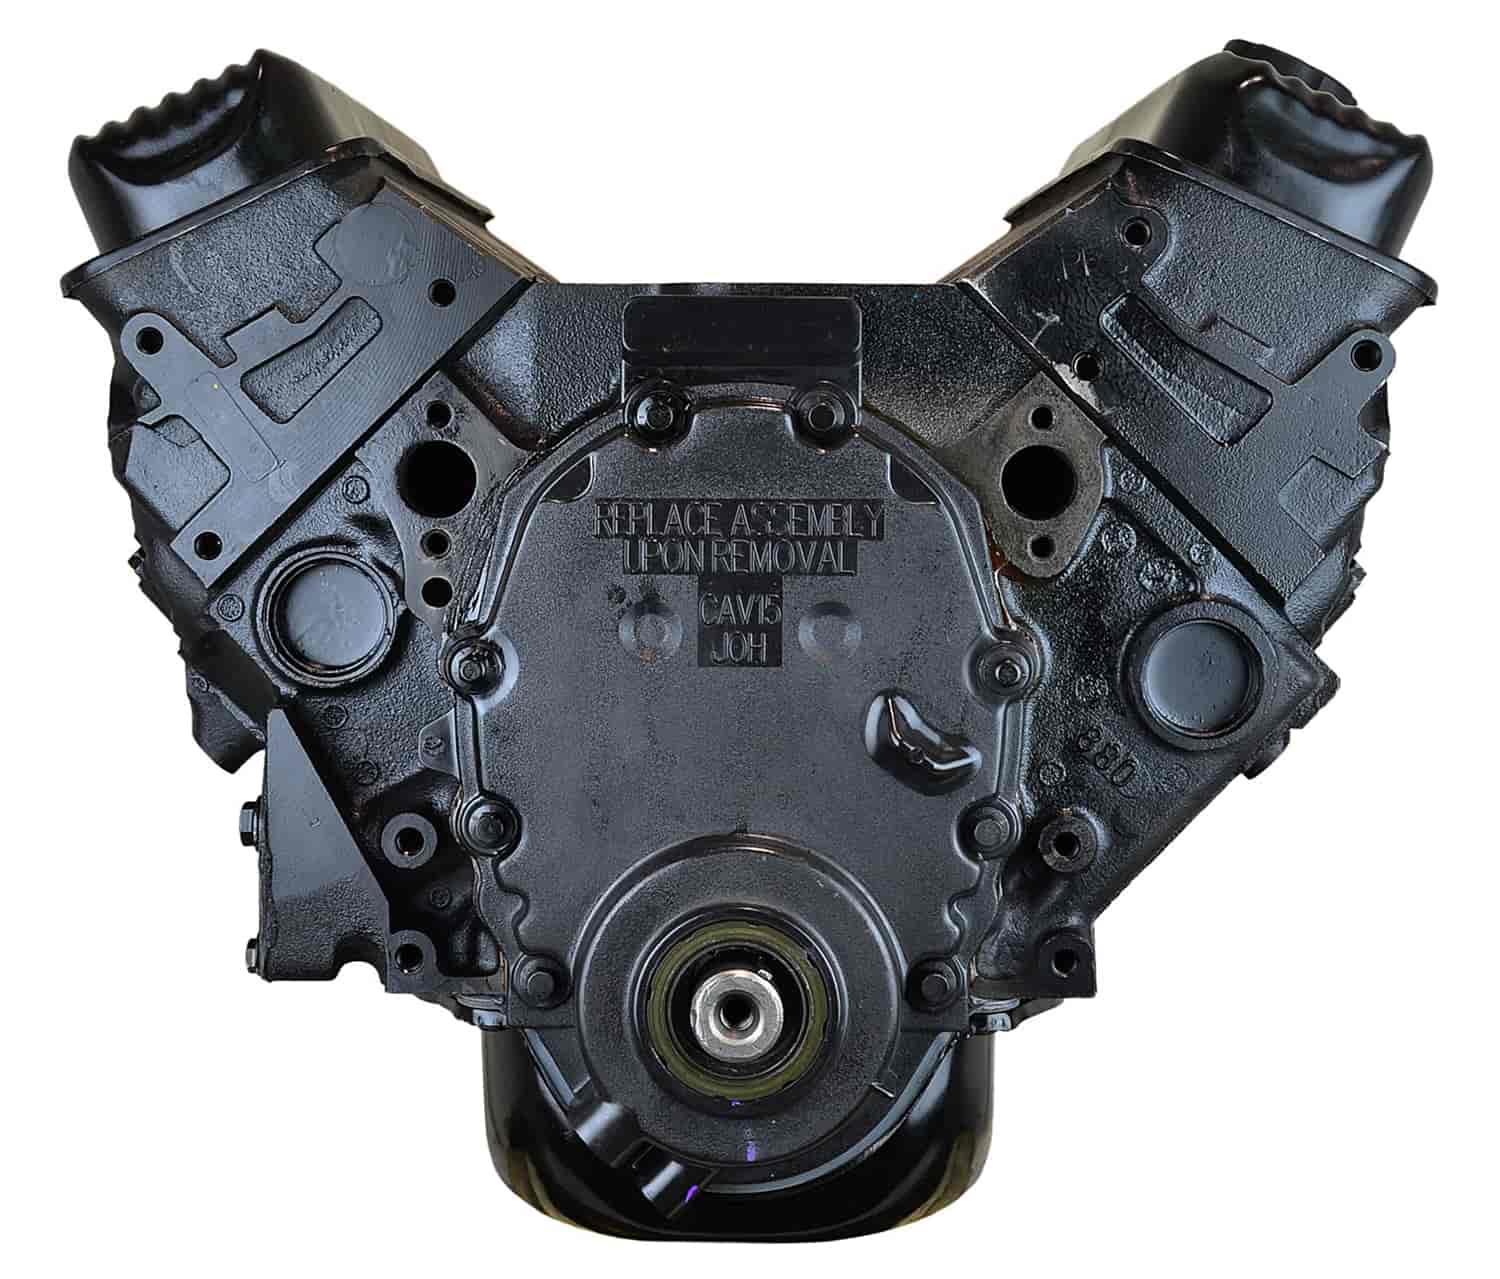 Remanufactured Crate Engine for Marine Applications with 1996-2006 Small Block Chevy 305ci/5.0L